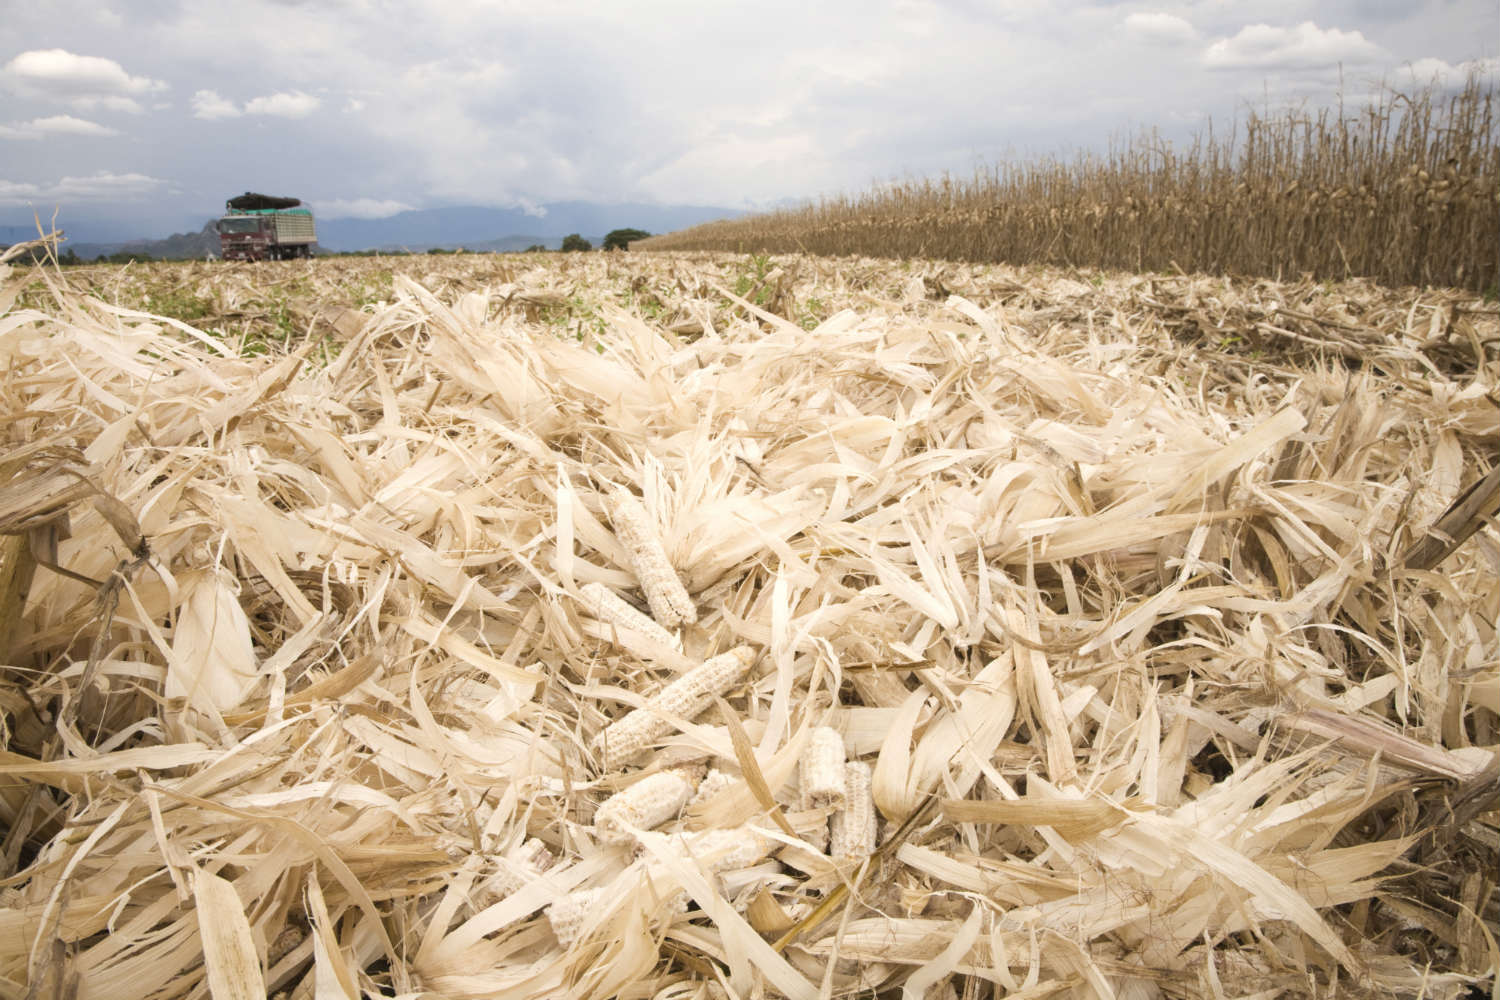 New research shows that next-generation biofuels made from corn waste aren't so green (Photographer's Choice via Getty Images)